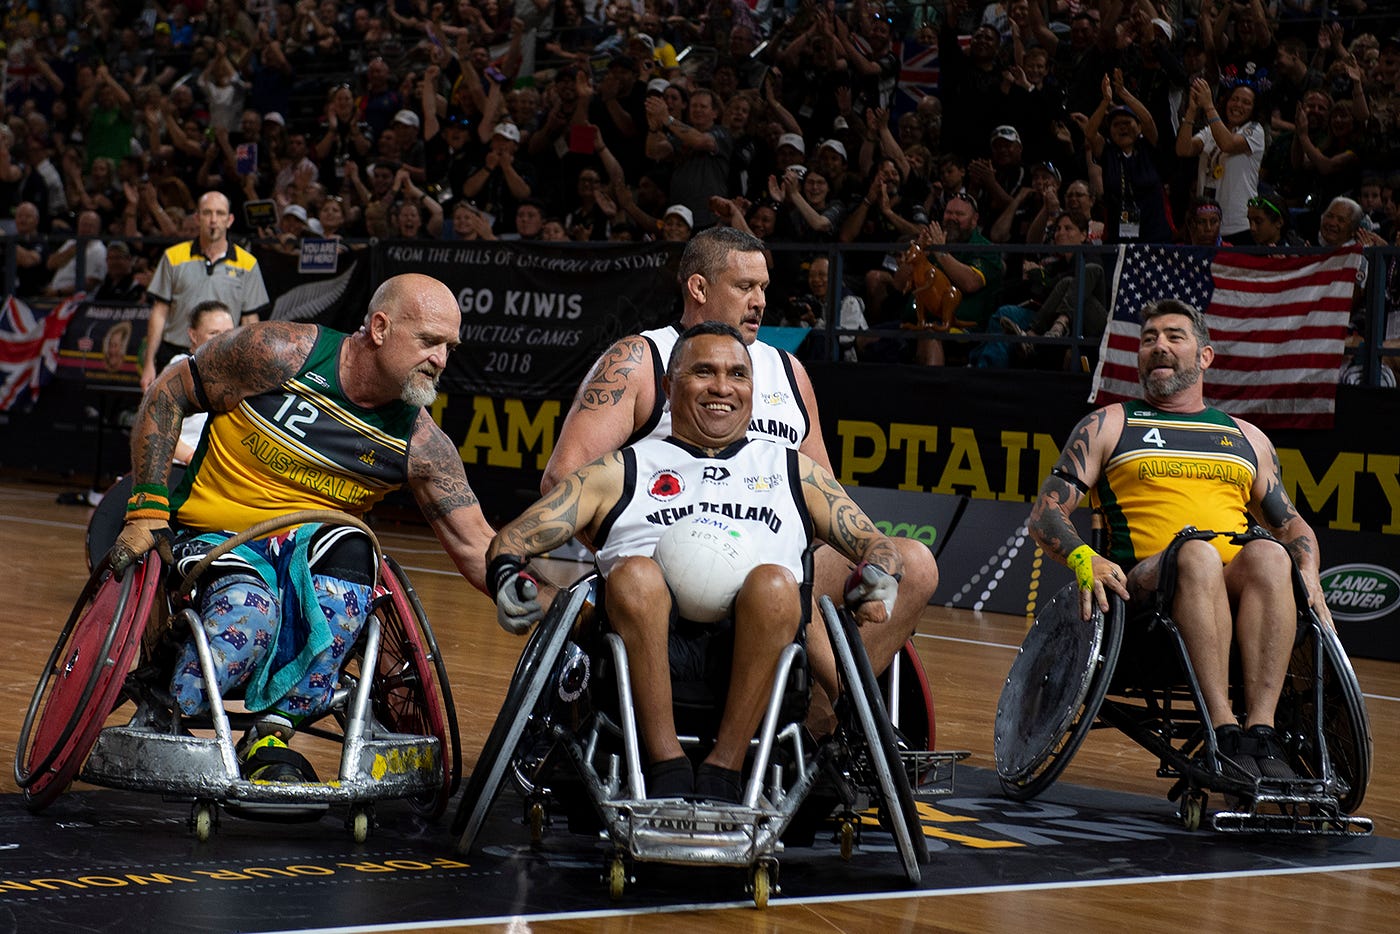 Spirit of Invictus outweighs trans-Tasman rivalry | New Defence Force Medium